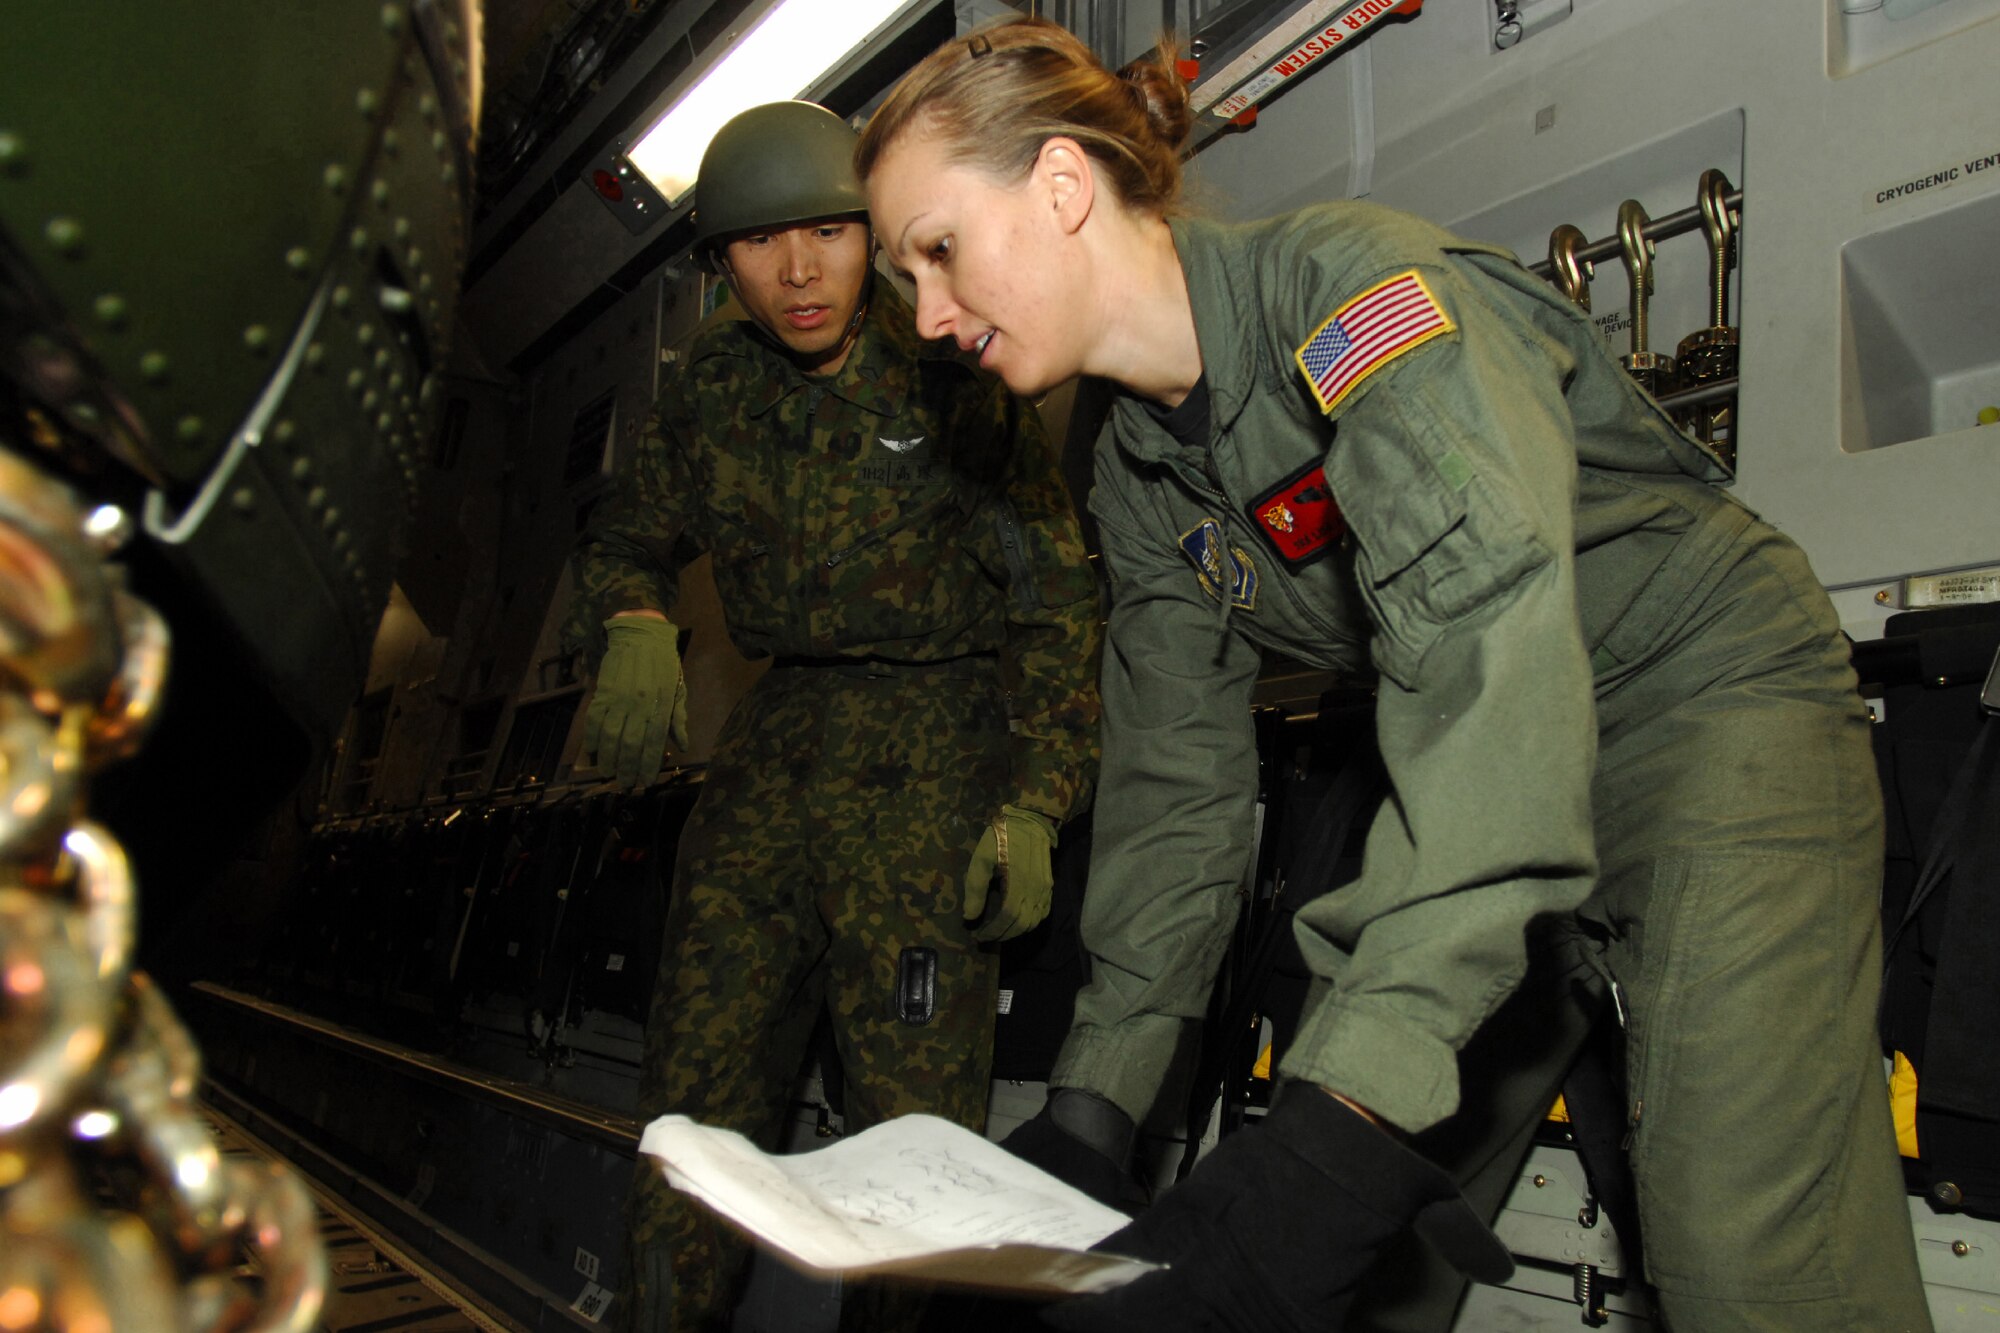 YOKOTA AIR BASE, Japan -- U.S. Air Force Senior Airman Lisa Long, right, and a Japan Ground Self Defense Force member, load a JGSDF CH-47J Chinook helicopter into a U.S. Air Force C-17 Globemaster III cargo plane Feb. 23. It was the first time a Japanese helicopter was loaded into another nation's aircraft. The demonstration was conducted the last morning of the Pacific Global Air Mobility Seminar held Feb. 22 and 23. Sergeant Boehm is a loadmaster assigned to the 535th Airlift Squadron, Hickam Air Force Base, Hawaii. The C-17 is also assigned to the 535th Airlift Squadron. The CH-47J is assigned to the 1st Helicopter Brigade at JGSDF Camp Kisarazu in Kisarazu City, Chiba Prefecture. (U.S. Air Force photo by Osakabe Yasuo)